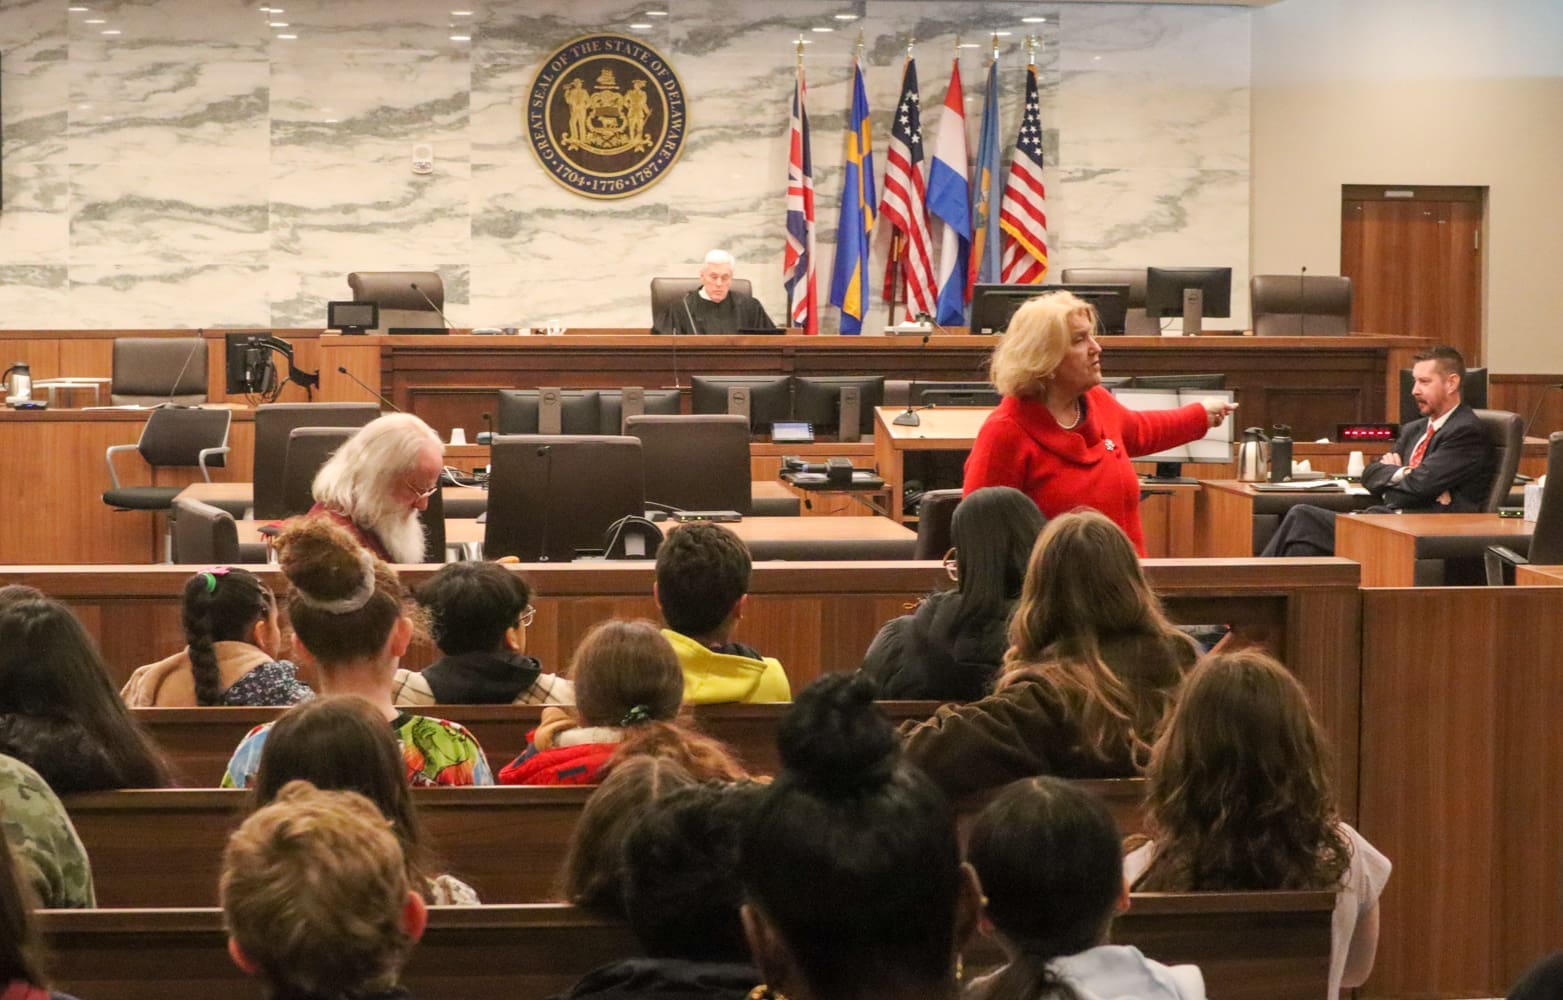 James McGiffin played Santa in the courthouse tradition.